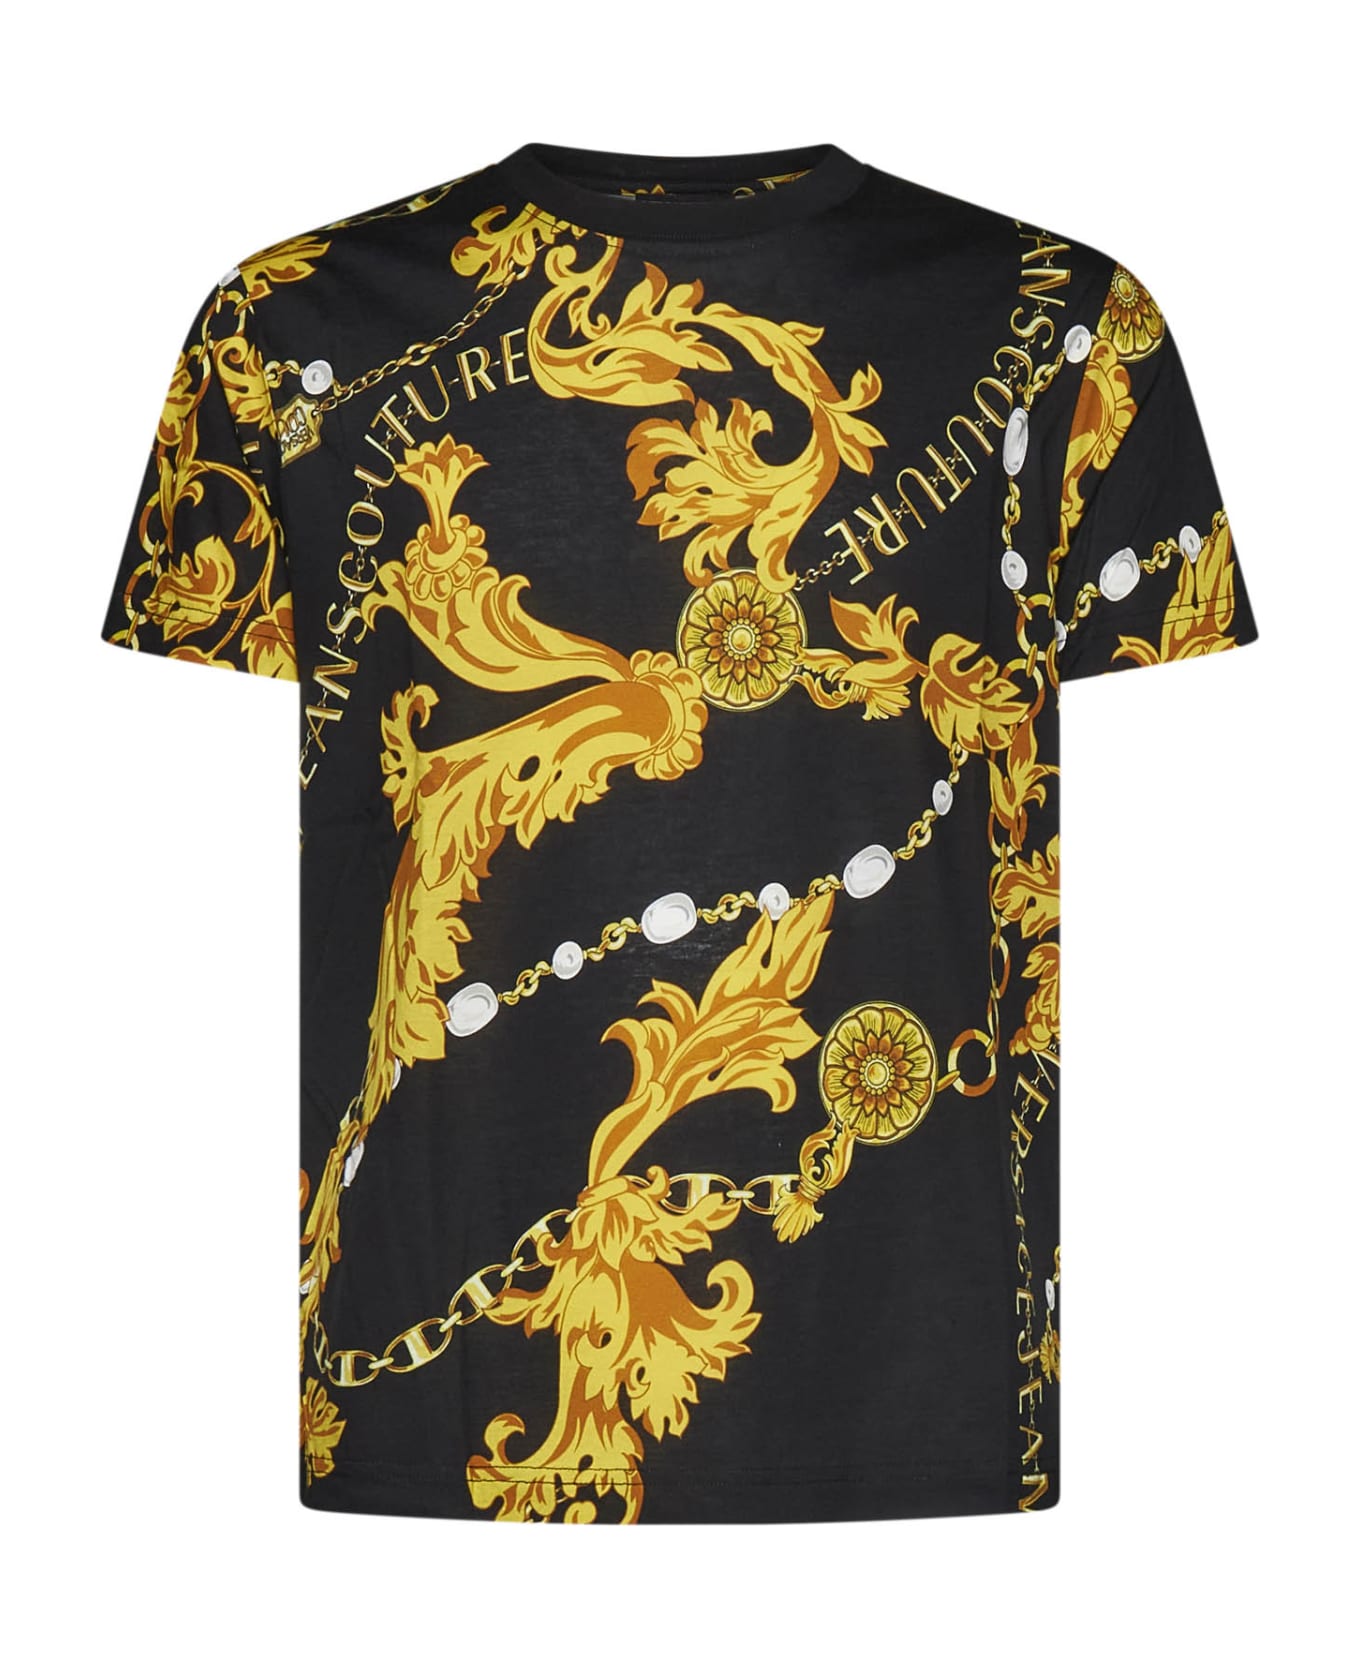 Versace Jeans Couture Chain Couture Print T-shirt - Black シャツ